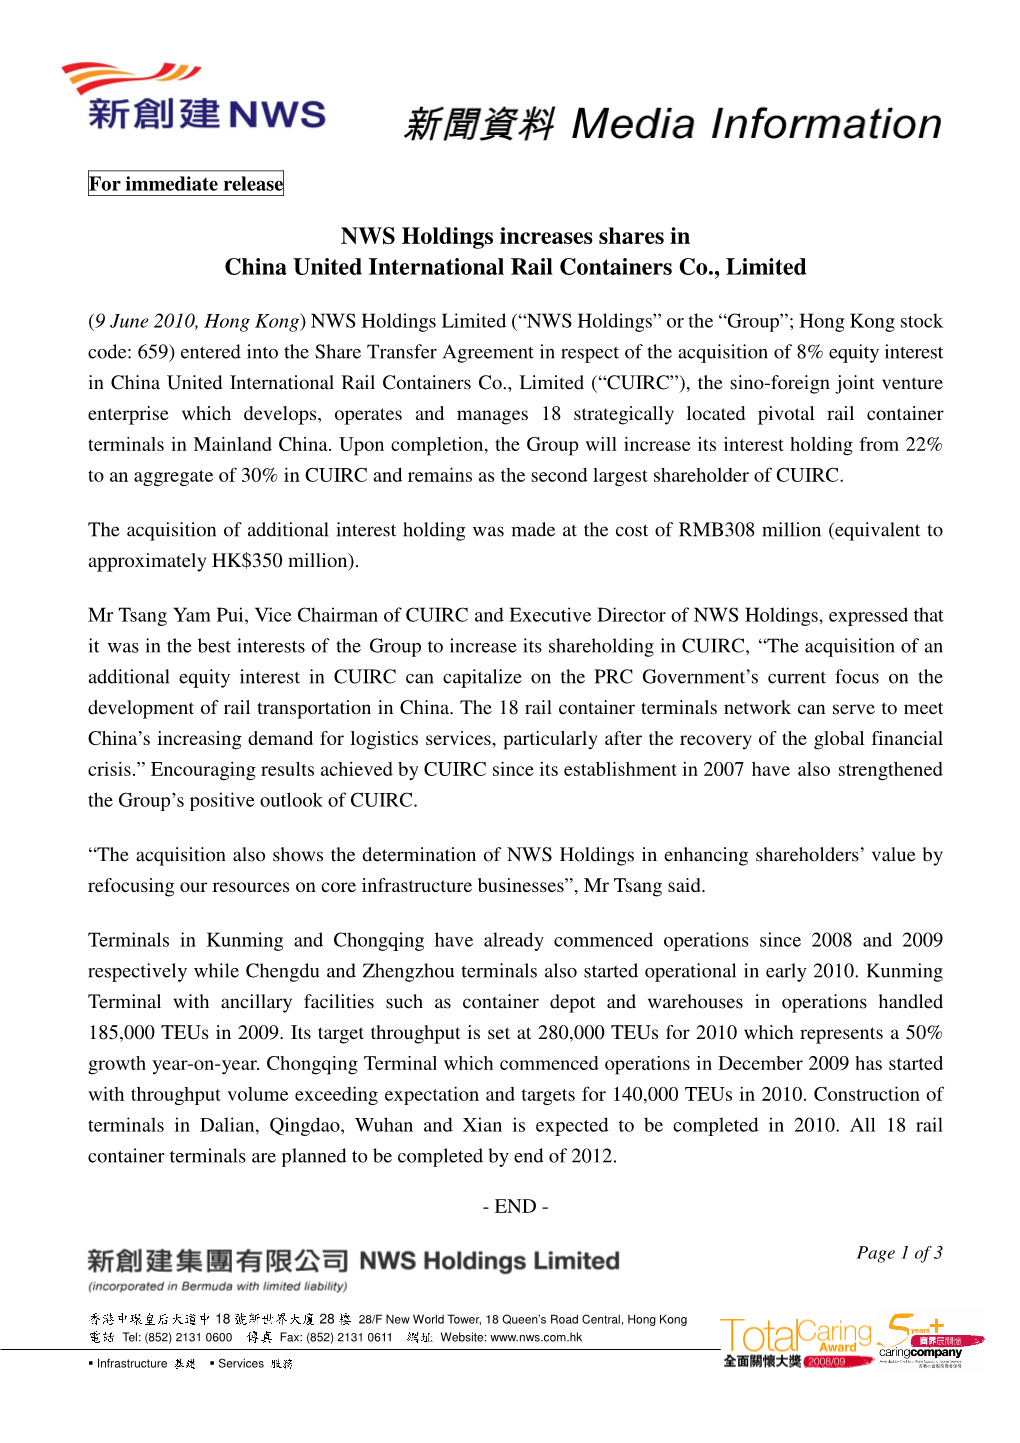 NWS Holdings Increases Shares in China United International Rail Containers Co., Limited